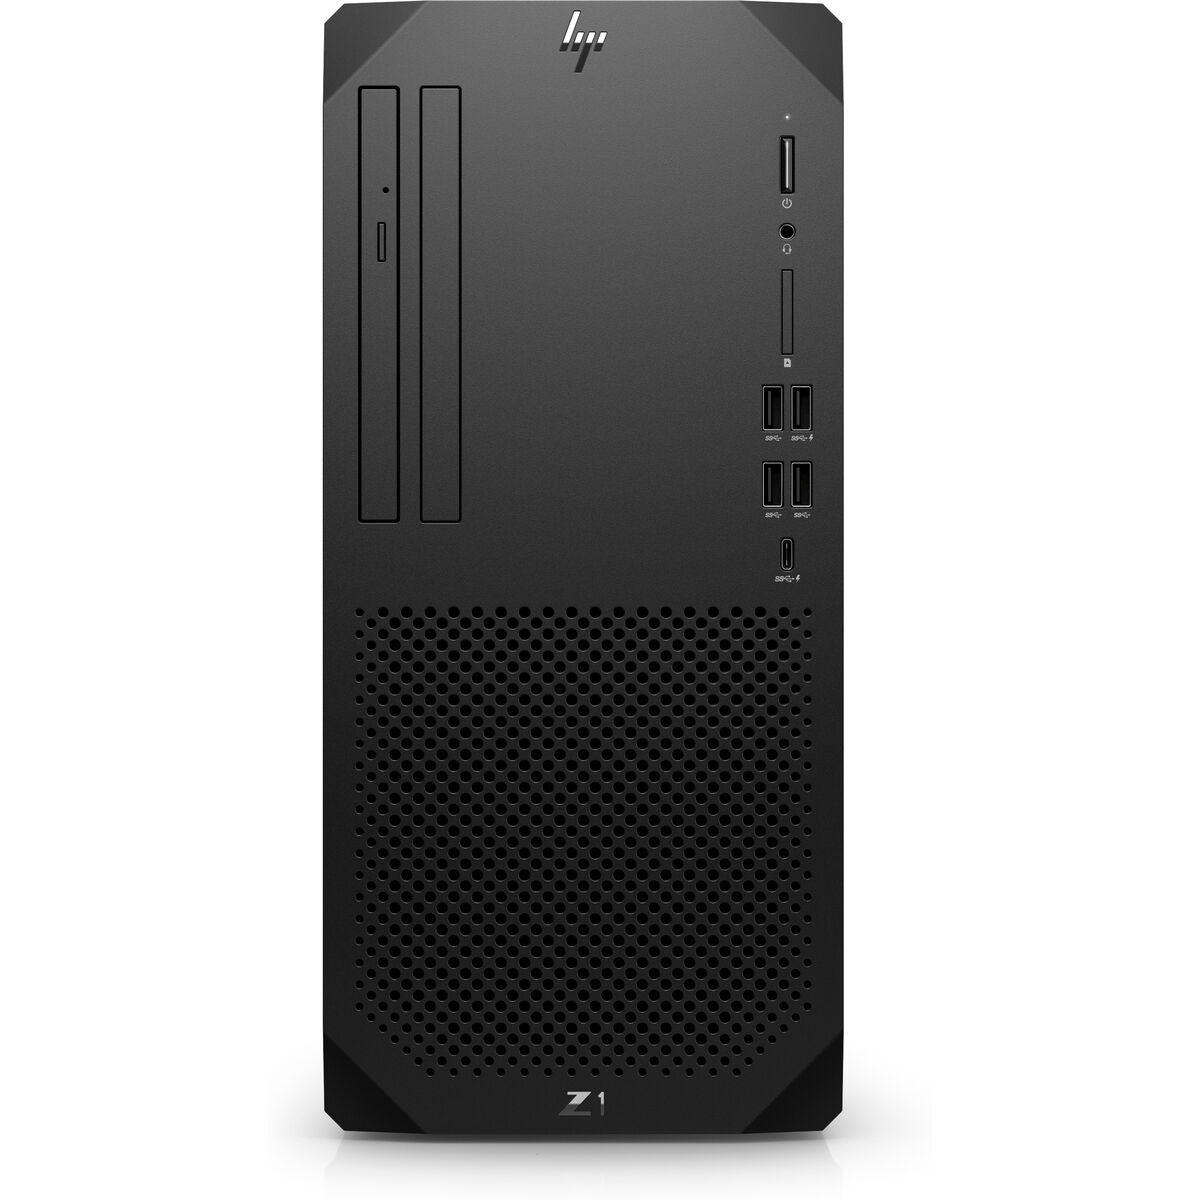 Desktop PC HP Z1 G9 Intel Core i7-14700 16 GB RAM 512 GB SSD, HP, Computing, Desktops, desktop-pc-hp-z1-g9-intel-core-i7-14700-16-gb-ram-512-gb-ssd, Brand_HP, category-reference-2609, category-reference-2791, category-reference-2792, category-reference-t-19685, category-reference-t-19903, category-reference-t-21381, computers / components, Condition_NEW, office, Price_+ 1000, Teleworking, RiotNook